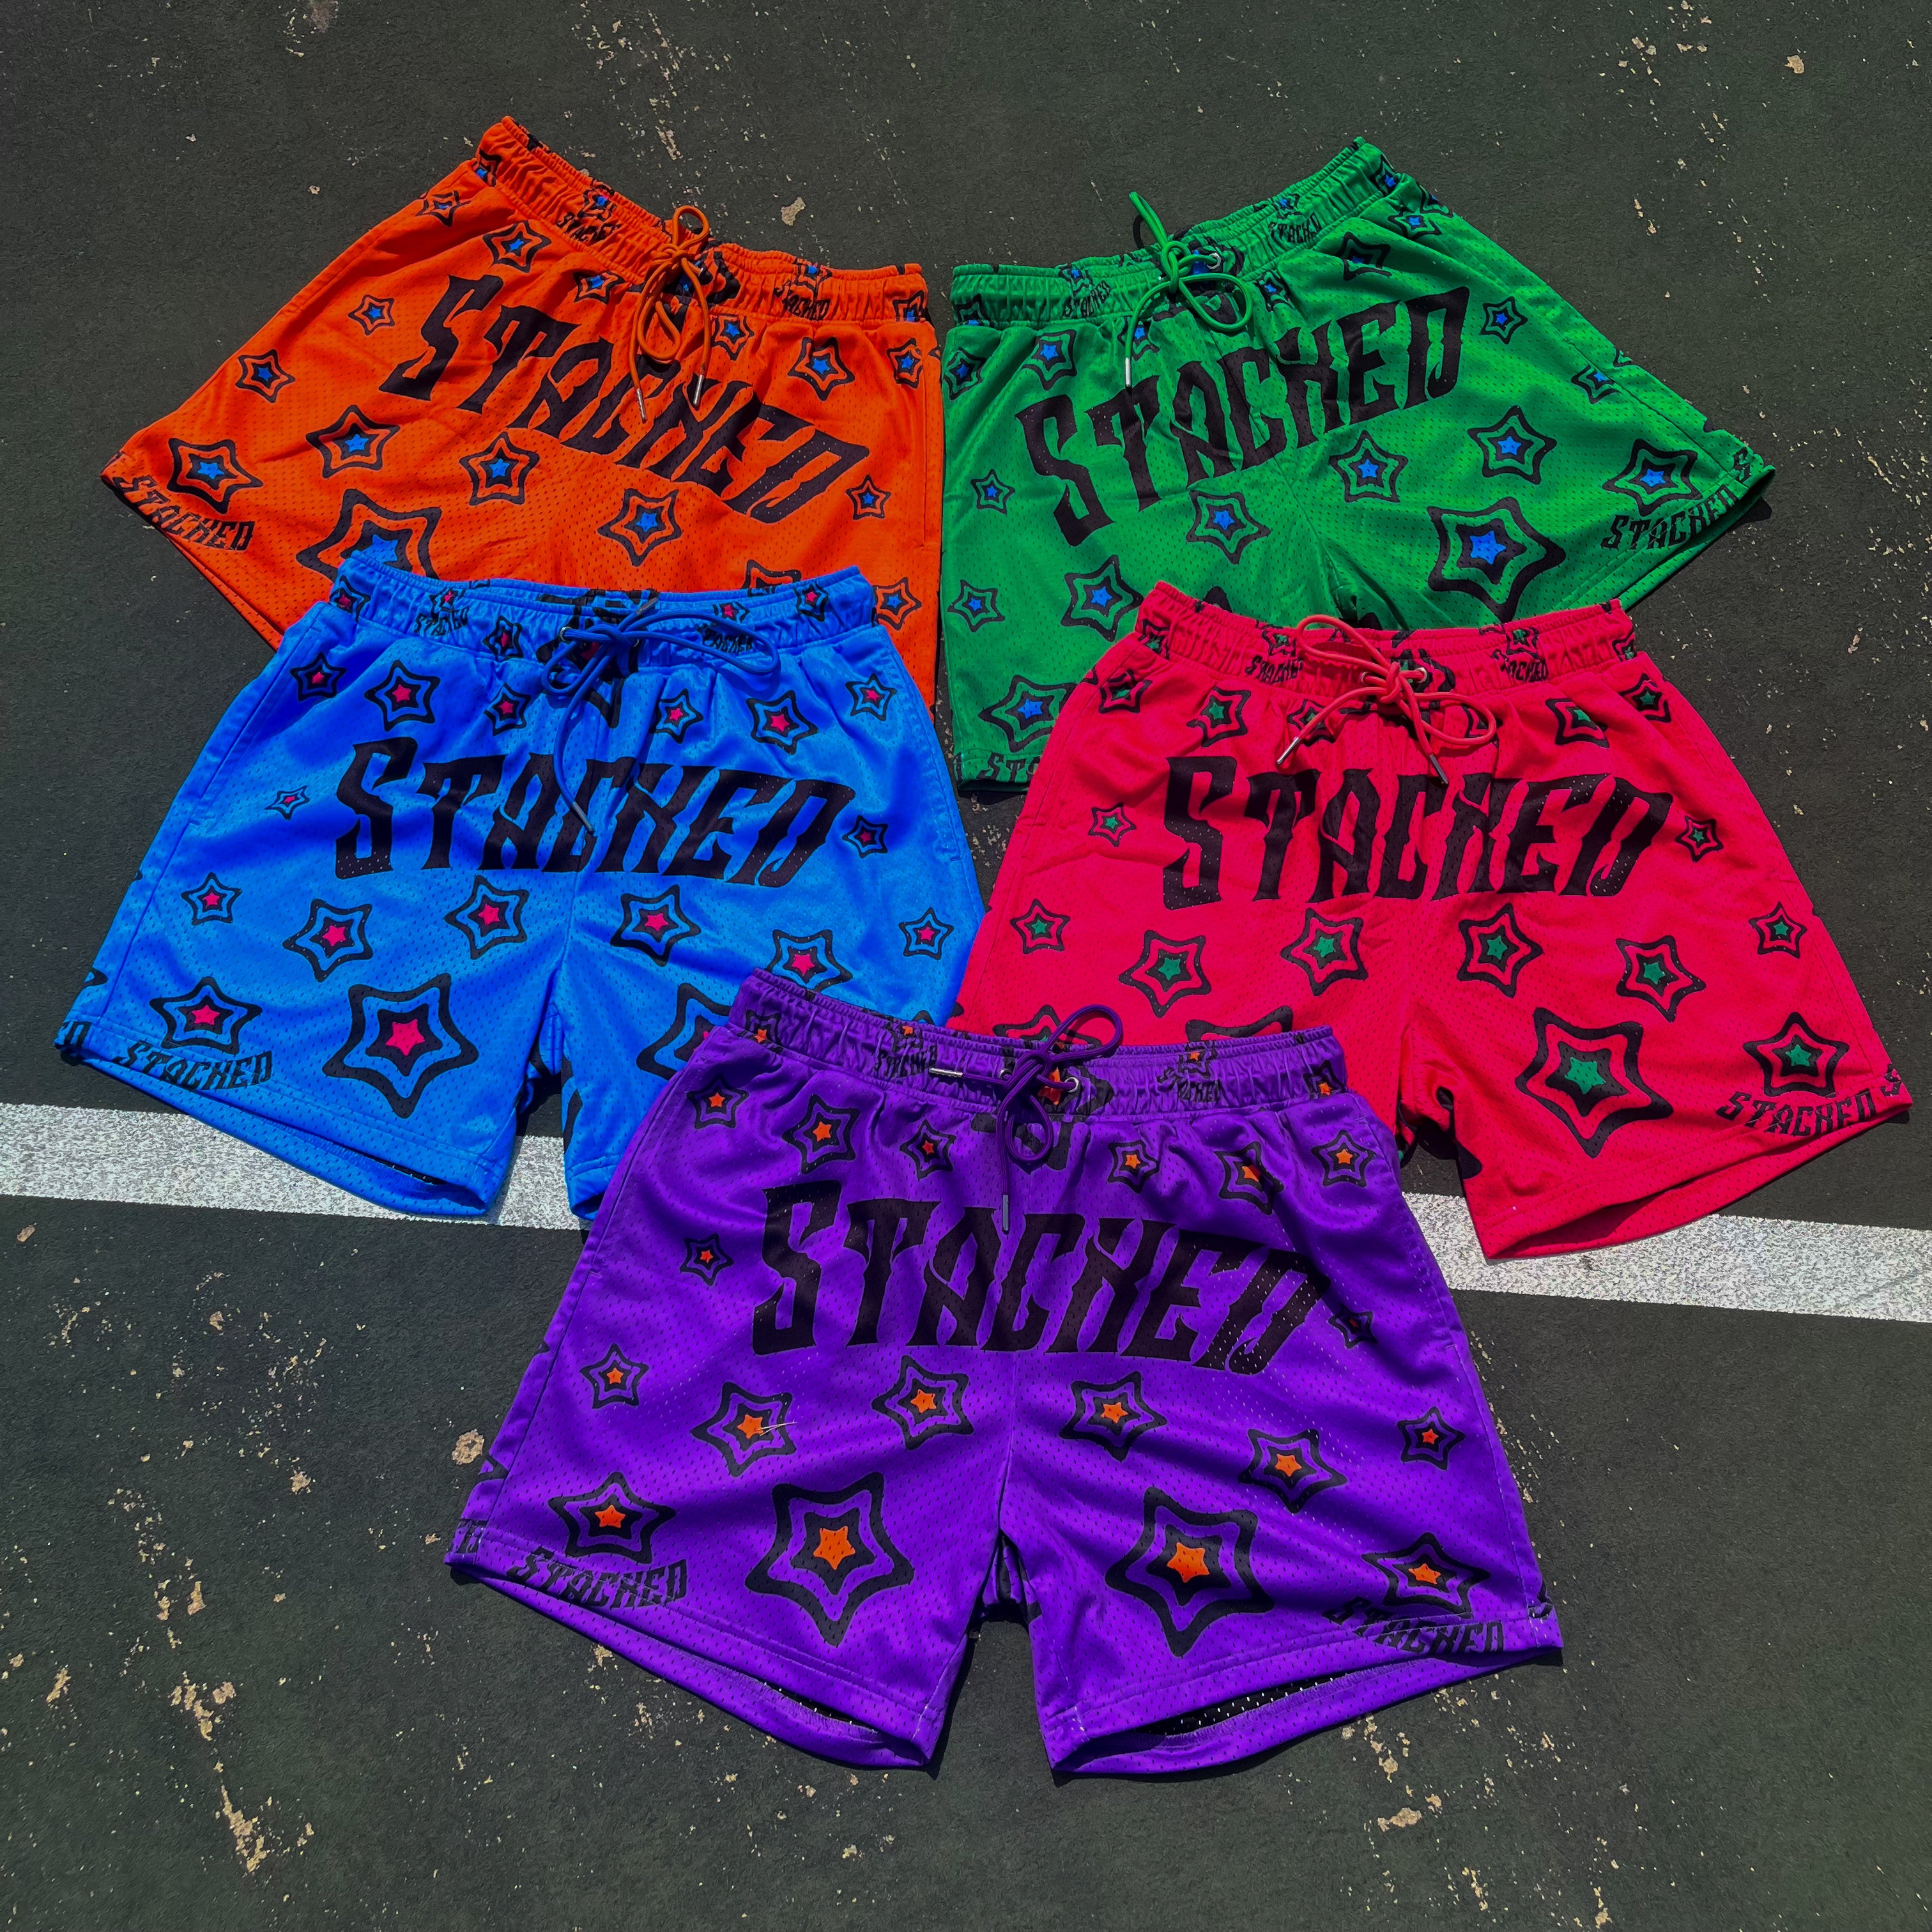 STACKED MESH SHORTS – Strictly Stacked